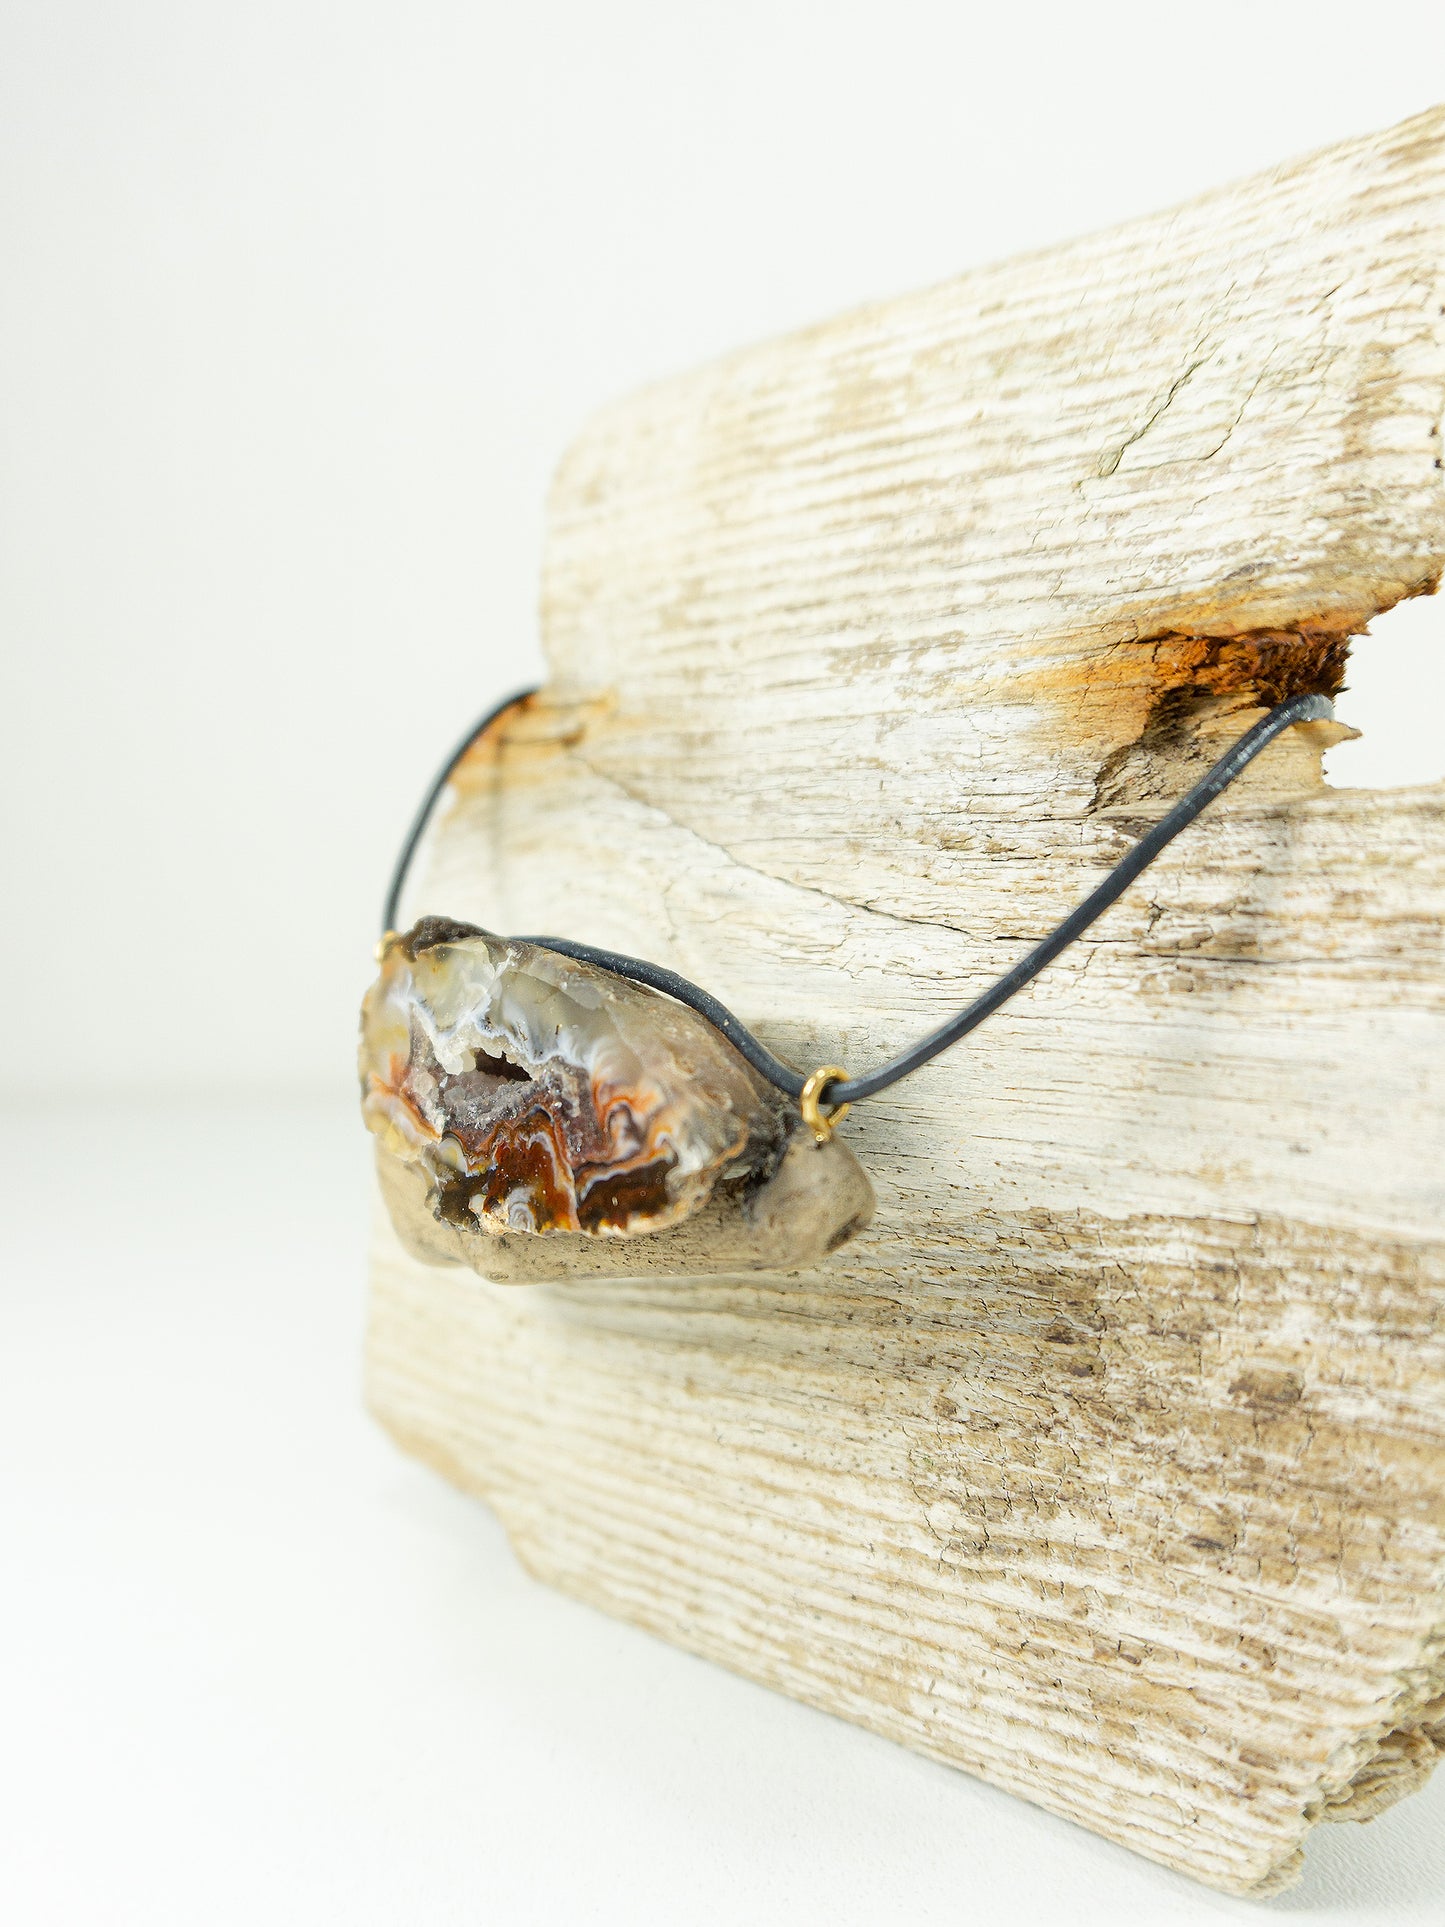 Handmade DRIFTWOOD NECKLACE 'Seeland' with agate druse, sustainable jewelry